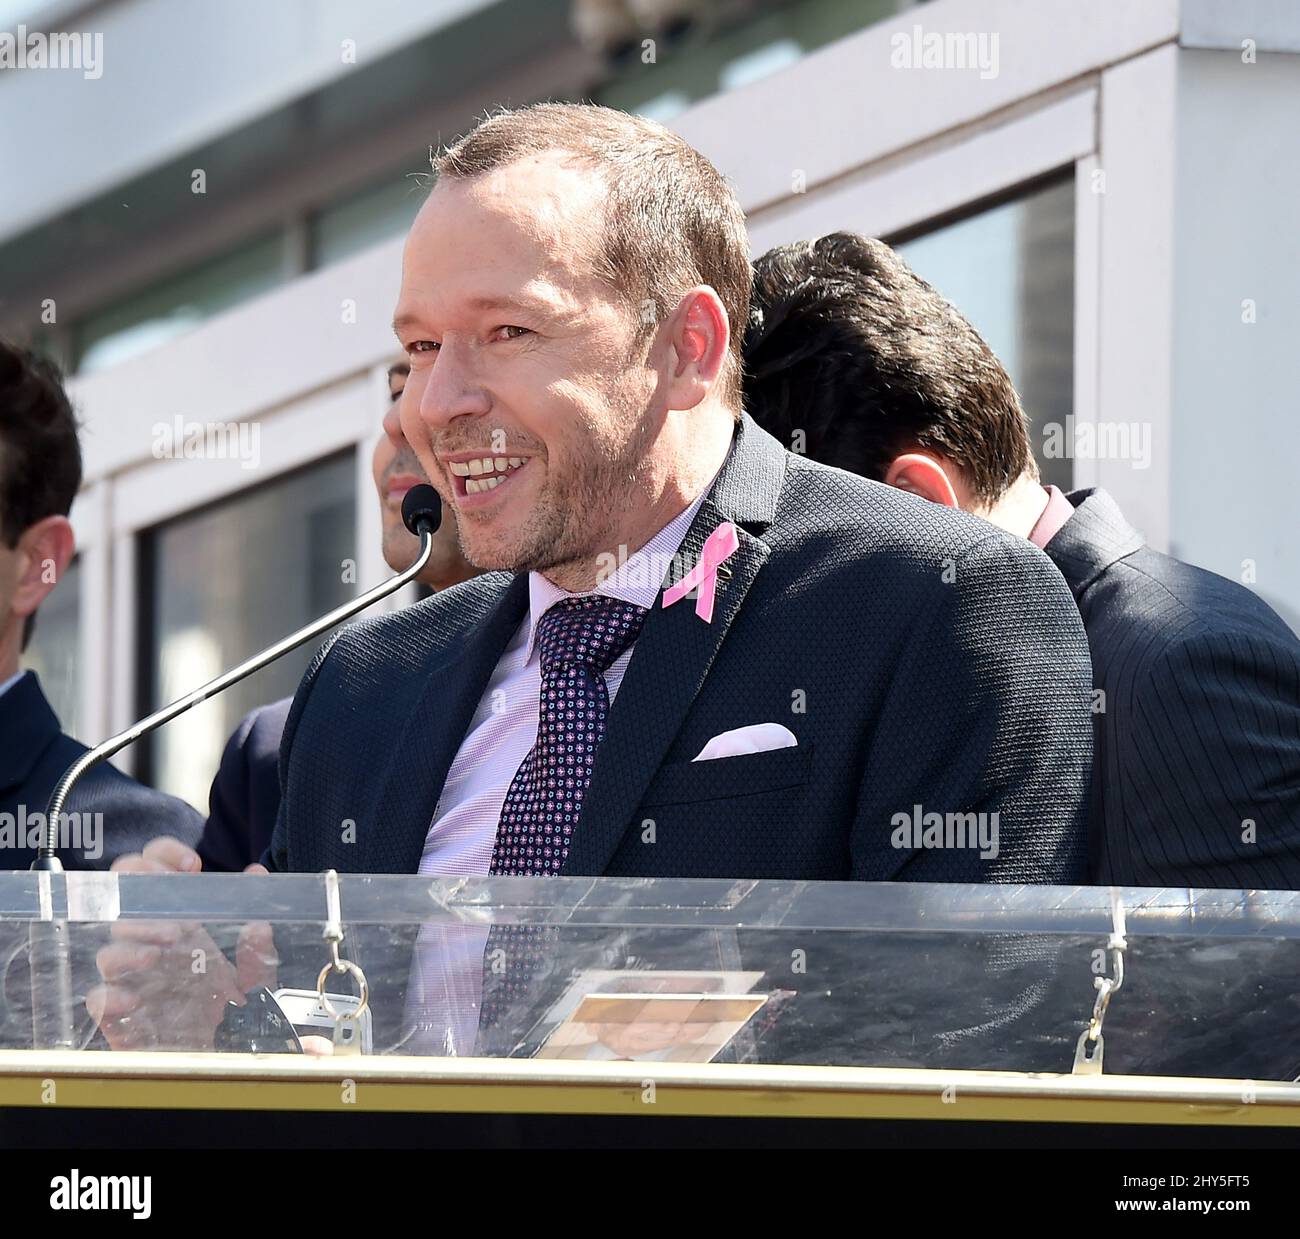 Donnie Wahlberg attending the New Kids on the Block Walk of Fame Star Ceremony on Hollywood Blvd, Hollywood, California. Stock Photo